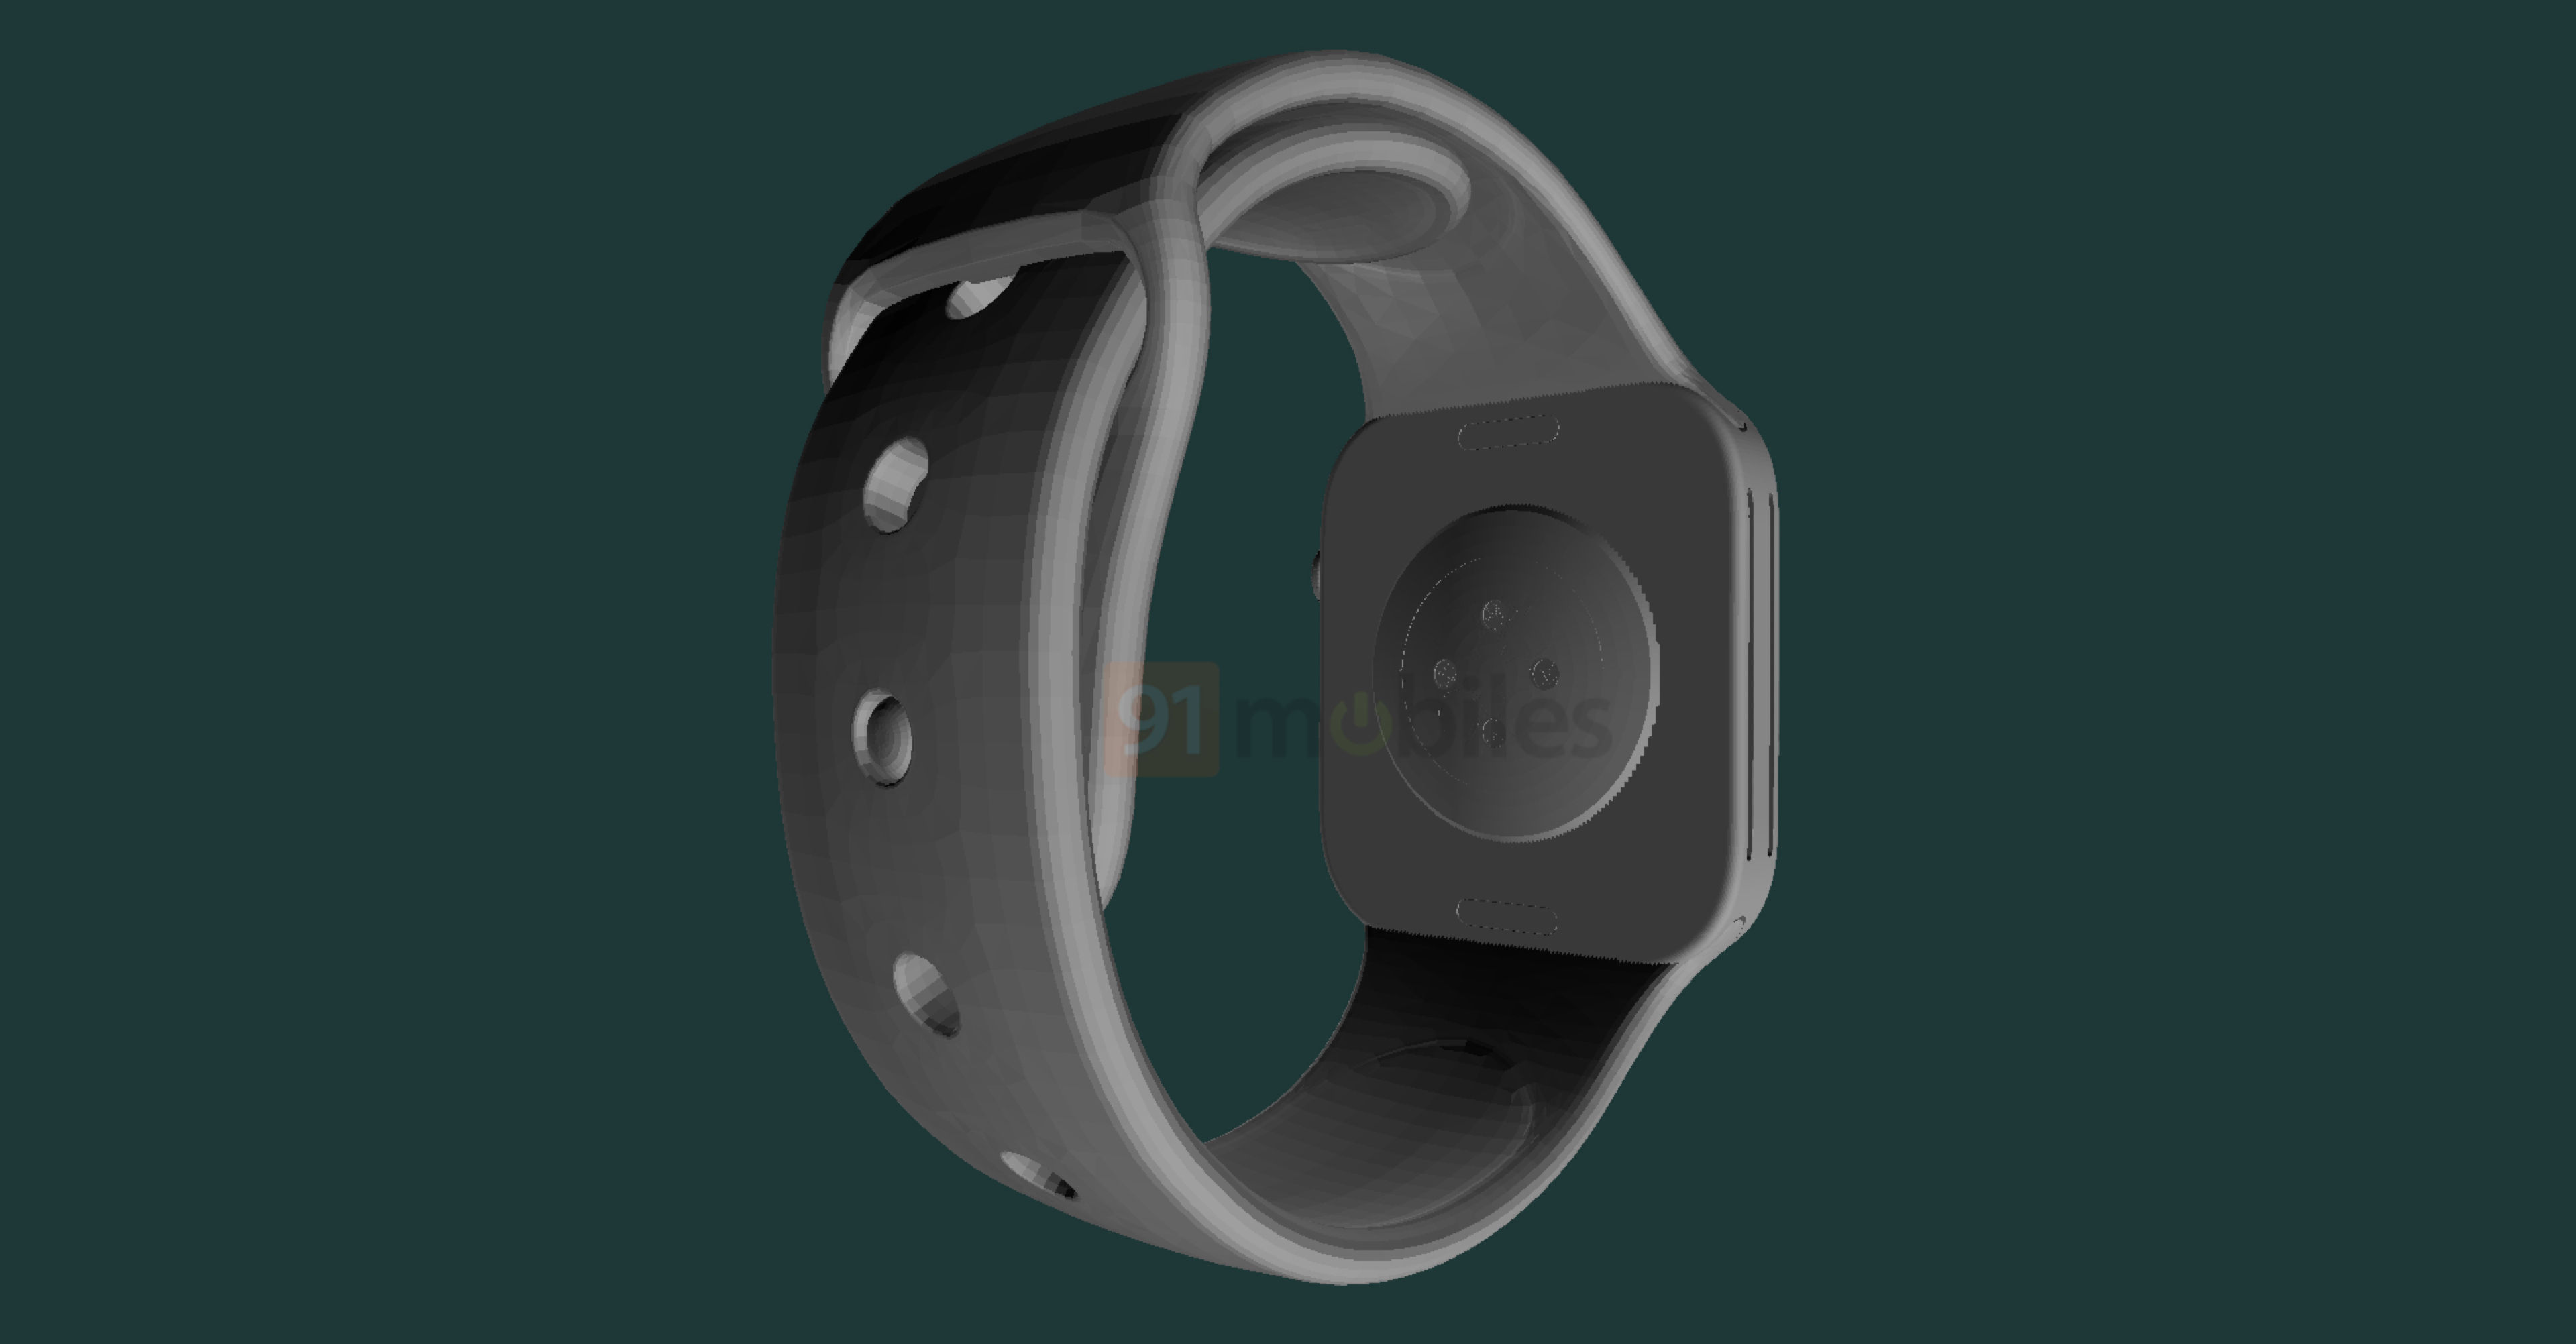 A CAD-based render of the back crystal on Apple Watch Series 7 